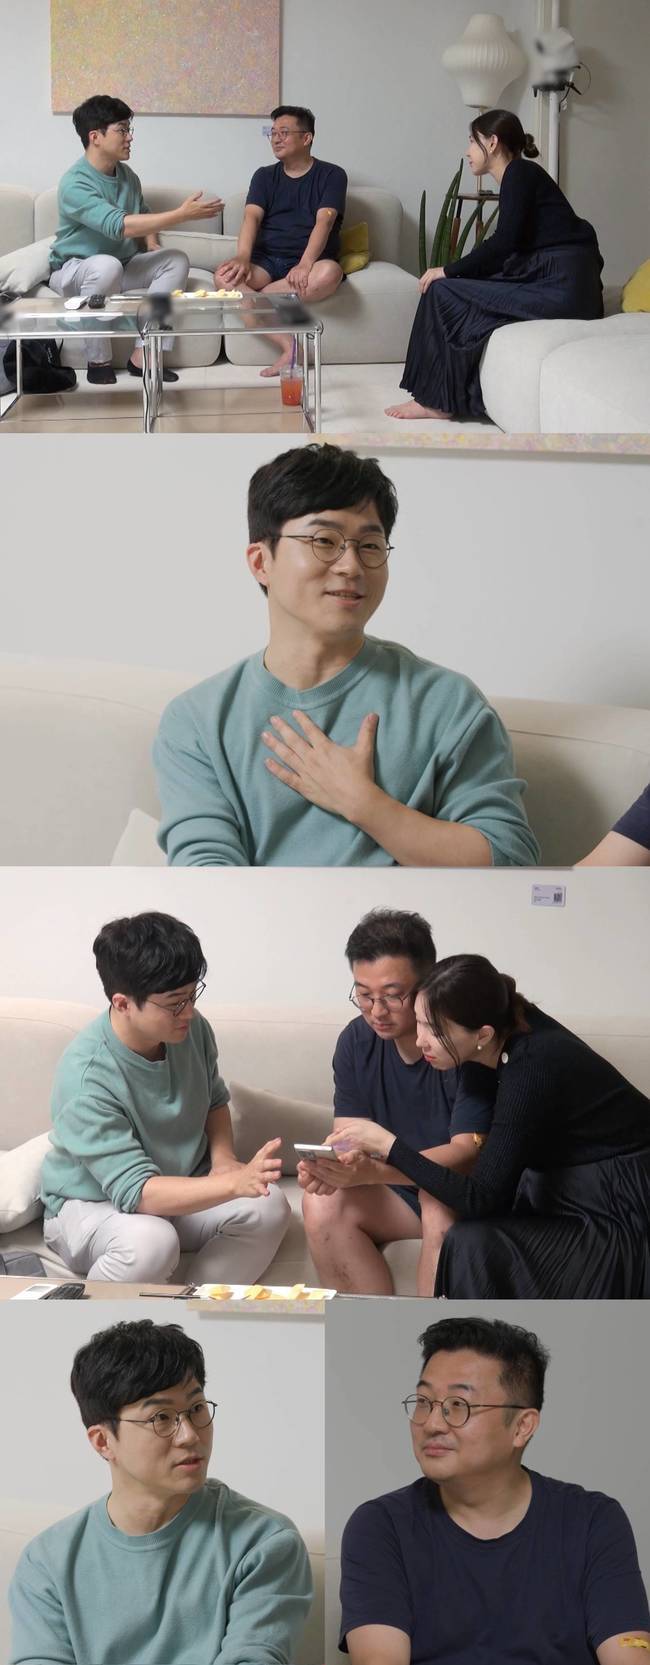 Taxman Moon Jea-wan reveals his multi-level fraud experienceSBS Same Bed, Different Dreams 2 Season 2 - You Are My Destiny (hereinafter referred to as You Are My Destiny), which airs on October 11, shows the meeting between singer Lee Ji-hye from the group shop, and the tax accountant Moon Jea-wan and India expert Shuka.Recently, 1.7 million YouTubers and India specialist Shuka visited Lee Ji-hye, Moon Jea-wans house.Moon Jea-wan, who was a fan of Shuka, was always embarrassed by the reception of the My favorite star Shuka.On this day, Shuka caught the eye by mentioning three directions for Share investment in the second half of 2021, which must be known to Lee Ji-hye and Moon Jea-wan.Shuka said, We have to invest in this. The studio MCs who watched him did not take their eyes off.Even Shuka is the back door that he was trying to reveal his first Share event and made the studio feel bad.Then, an ideal air current was caught between Moon Jea-wan and Shuka, and India Battle was held between the two.Moon Jea-wan, a tax accountant and master of real estate, has changed the importance of real estate, and Shuka has engaged in a tense nervous battle on India knowledge, emphasizing the importance of Share.The India Battle ending of Shuka and Moon Jea-wan is revealed on air.Moon Jea-wan surprised Lee Ji-hye by telling her of her experience of multi-level fraud; Lee Ji-hye was embarrassed by the story of the fraud she first heard.Moon Jea-wan surprised everyone by saying that he was in this after the shock of the fraud.Indeed, I wonder what happened to Moon Jea-wan.